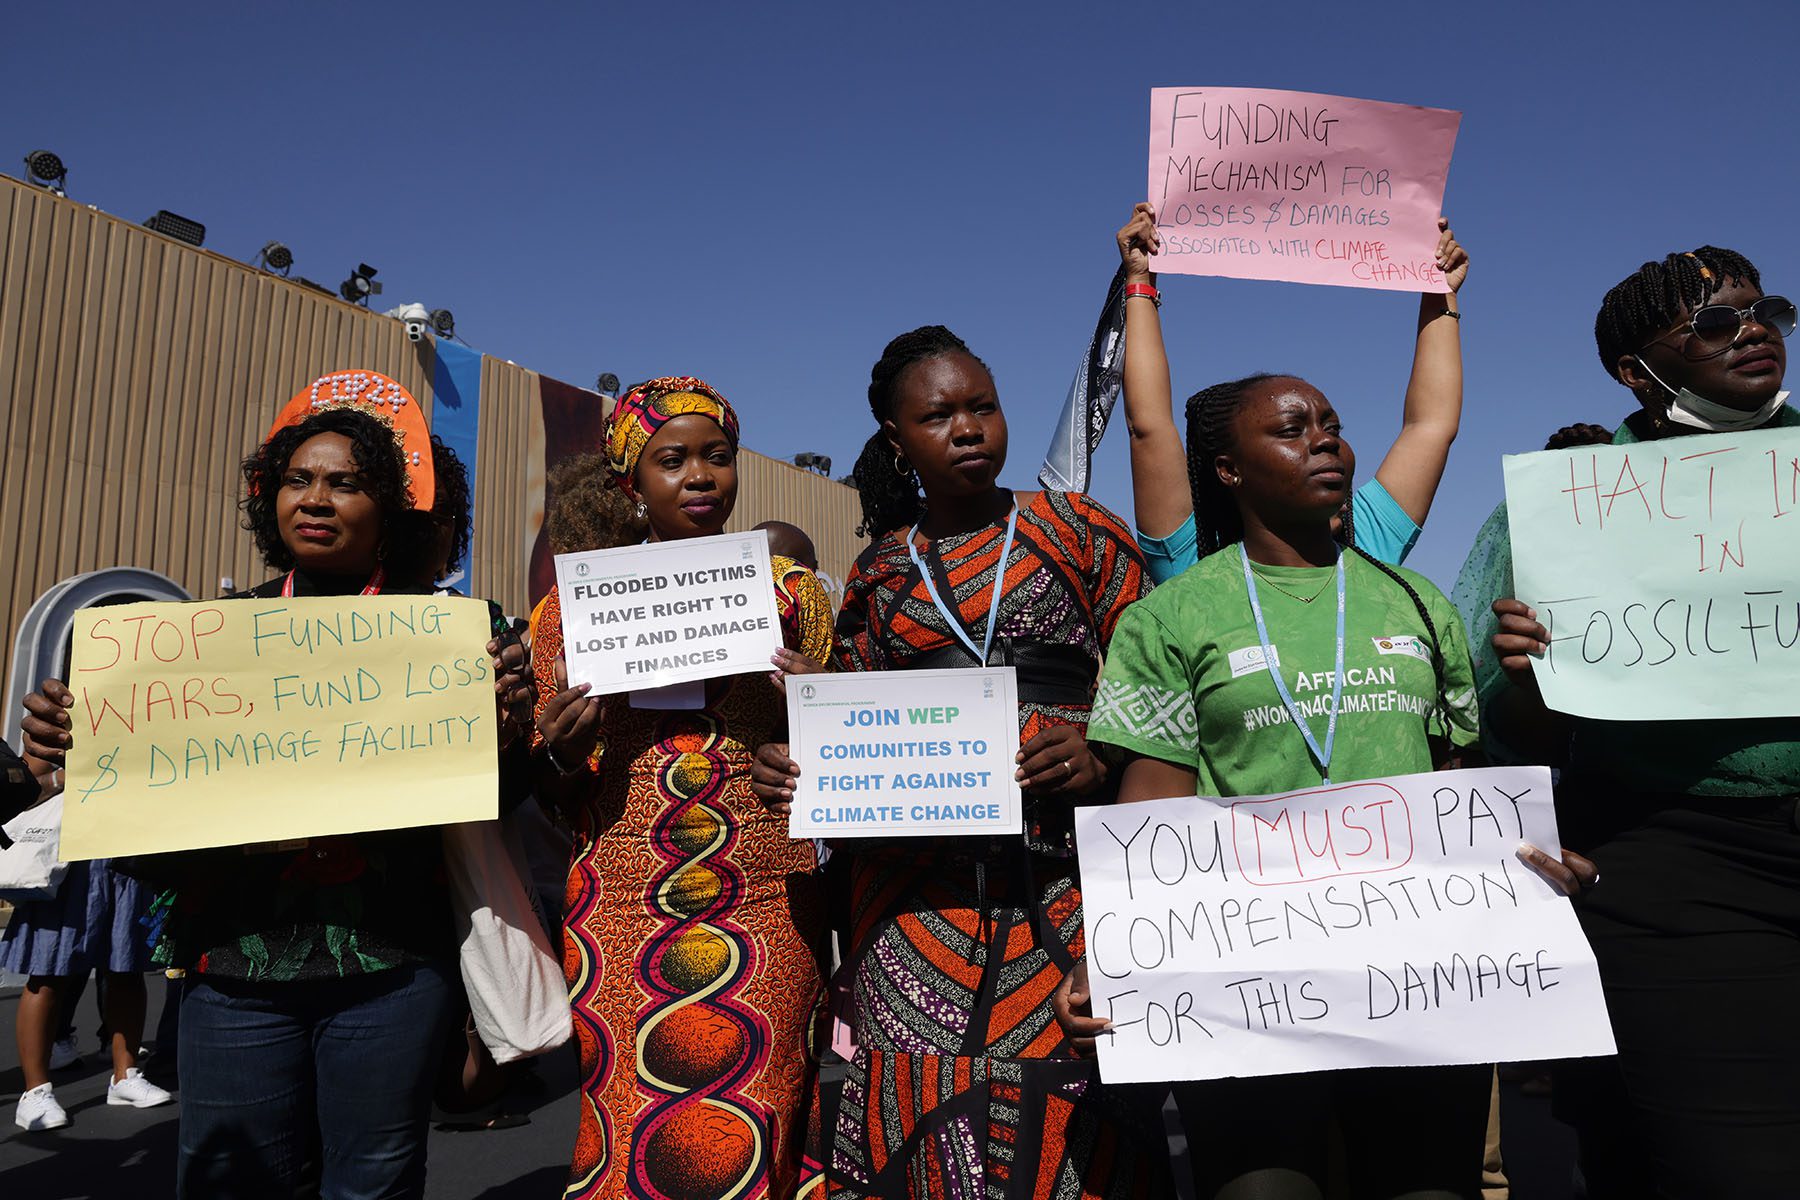 African activists hold signs that read "you must pay compensation for this damage" and "funding mechanism for losses & damages accocoated with climate change"